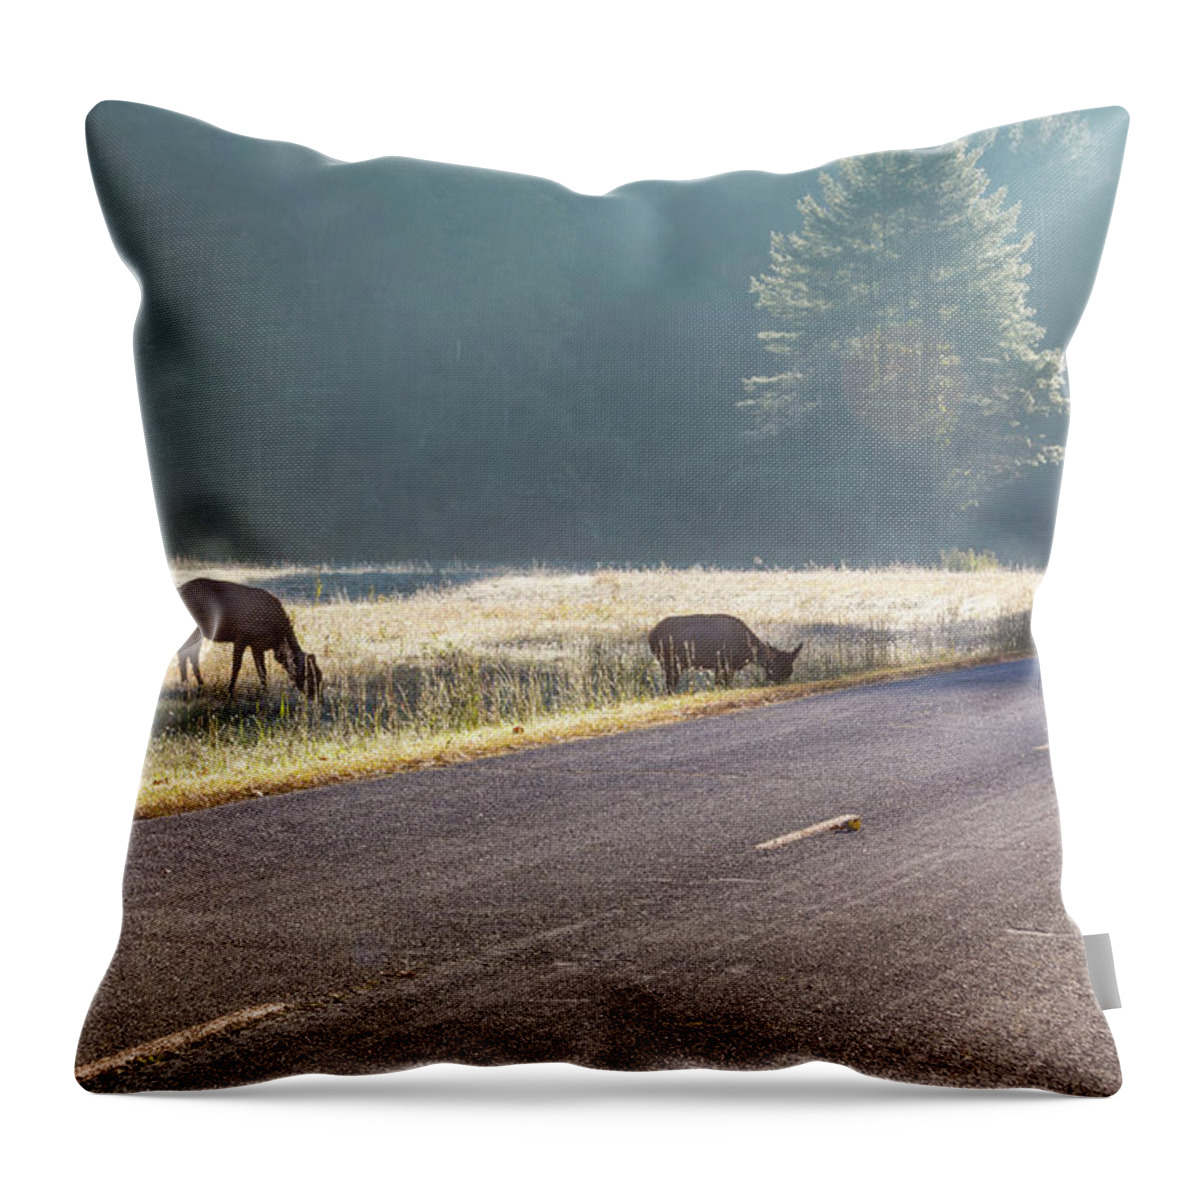 Elk Throw Pillow featuring the photograph Searching For Greener Grass by D K Wall